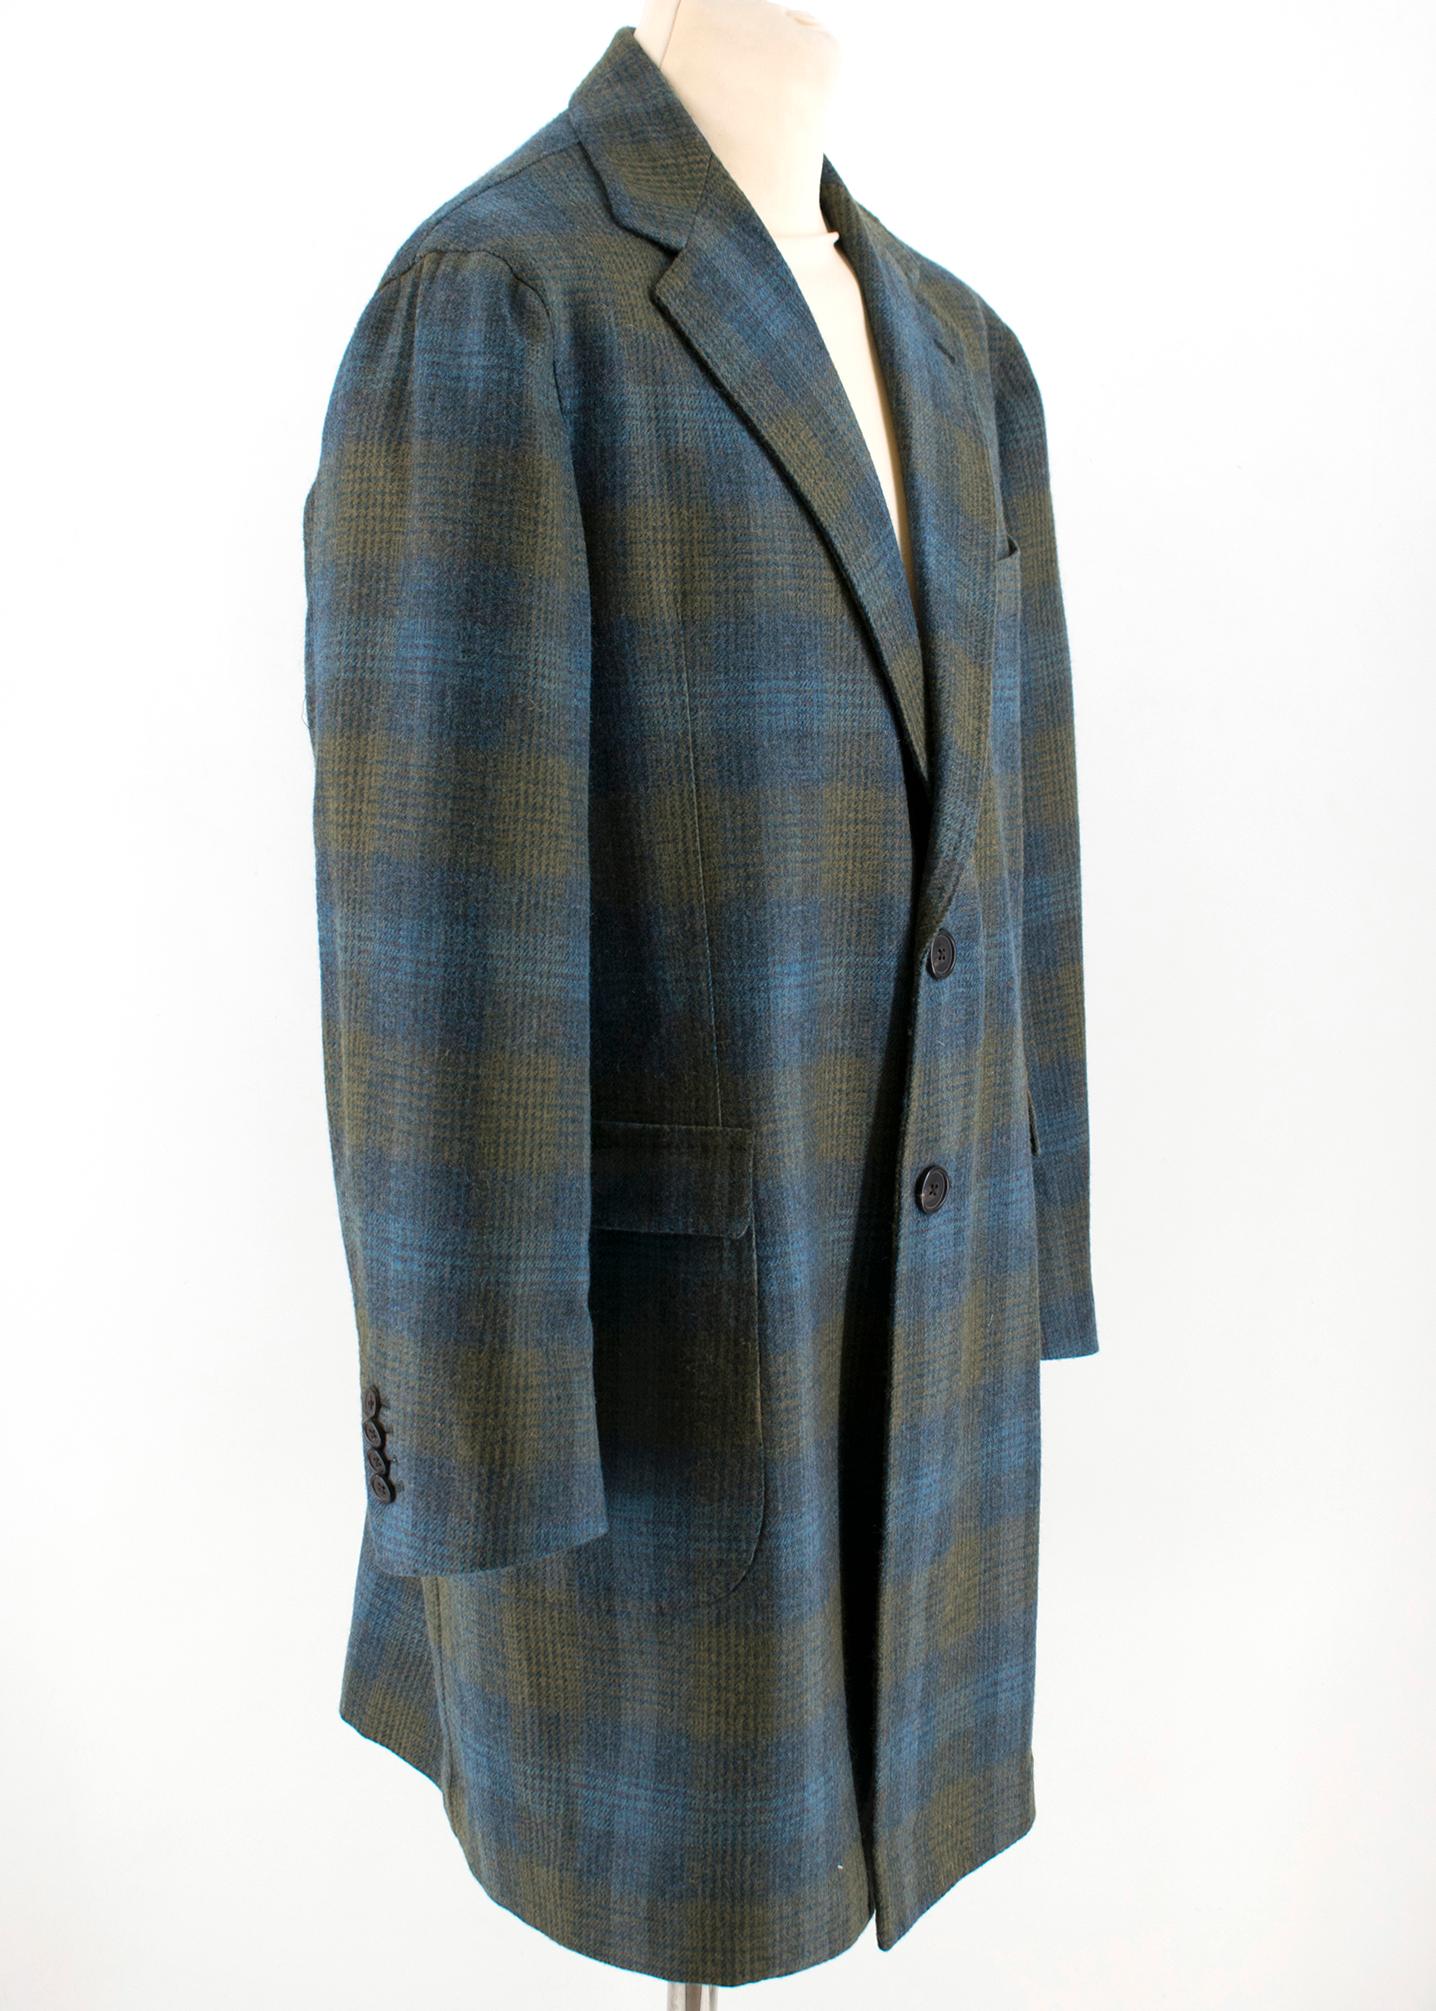 Sartoria Solito Green Tweed Tailored Checked Coat

- This timeless piece was tailored by the famous Sartoria Solito
- It features front pockets, single breasted pocket, two inside pockets 
- Brown button fastening and brown button